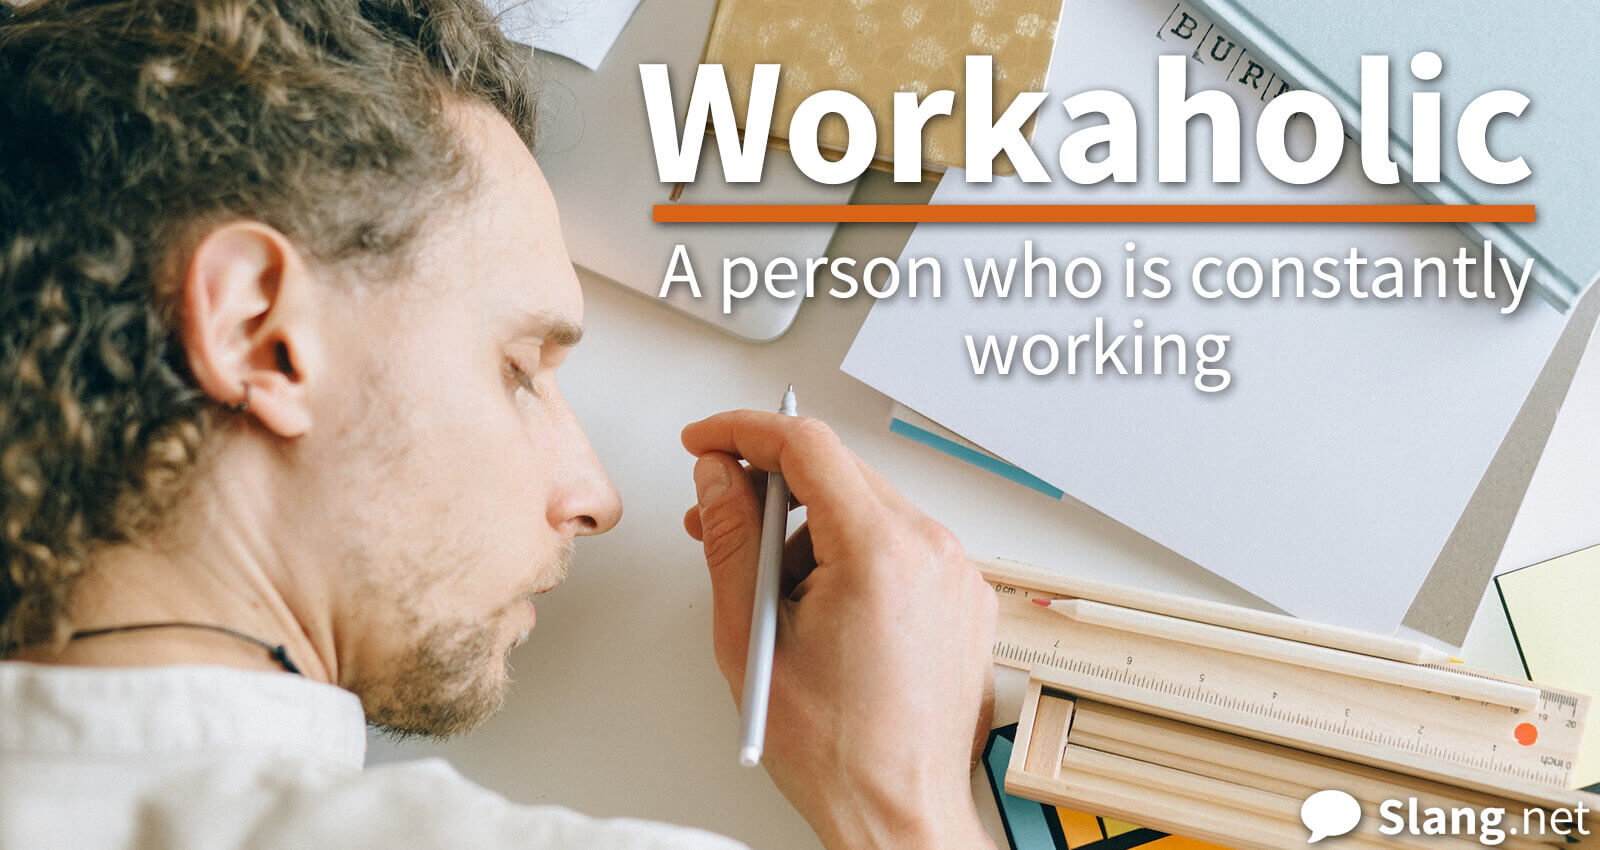 You might be a workaholic if you are falling asleep while working